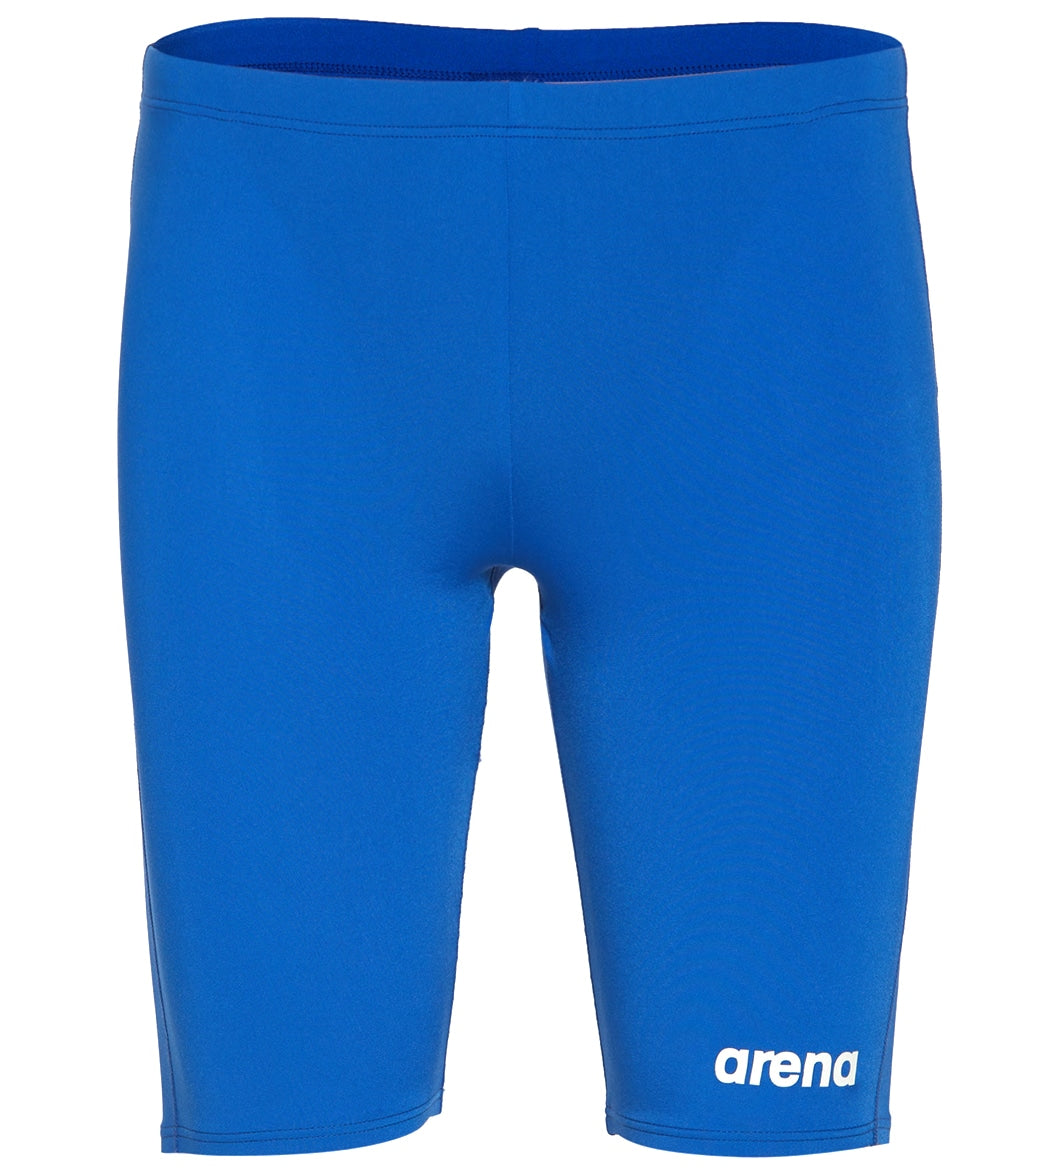 Arena Men's Solid Jammer Swimsuit Royal/White at SwimOutlet.com